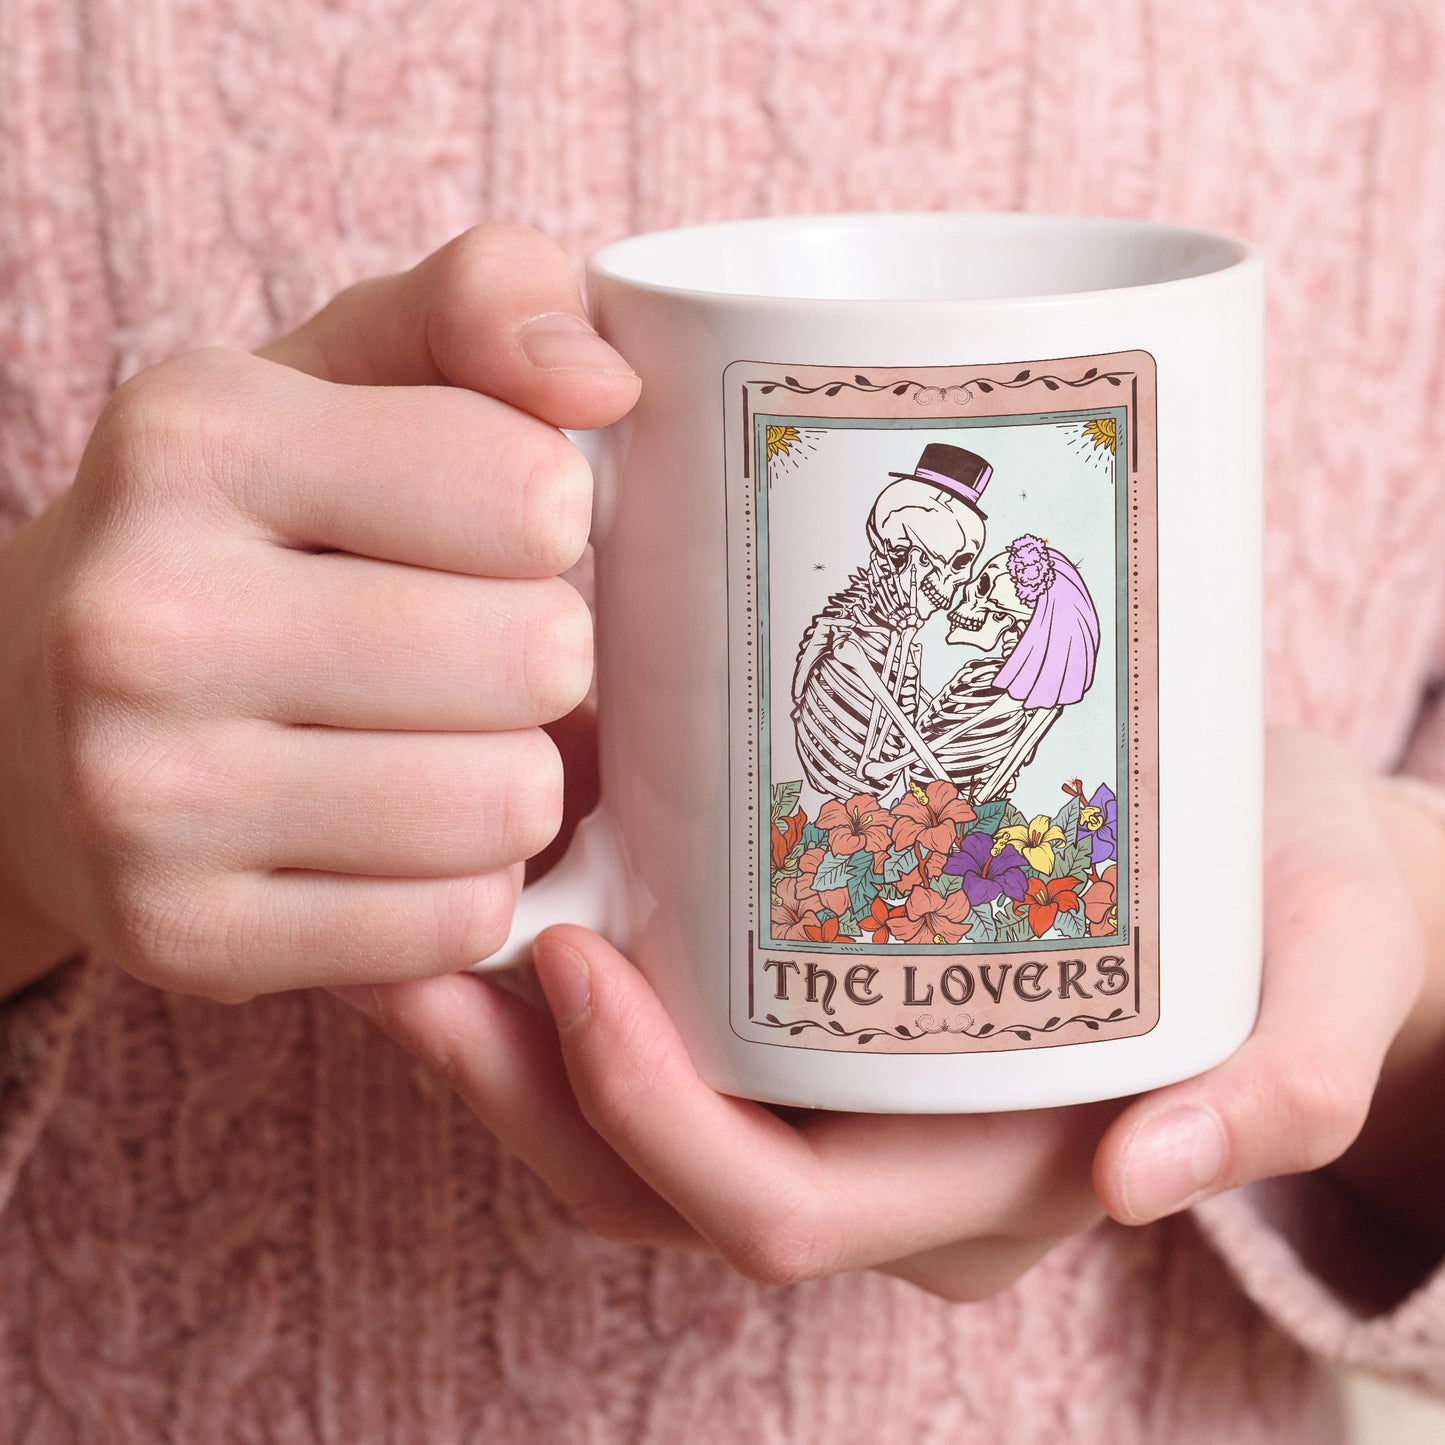 white mug printed with the lovers tarot card showing a skeletons in wedding attire